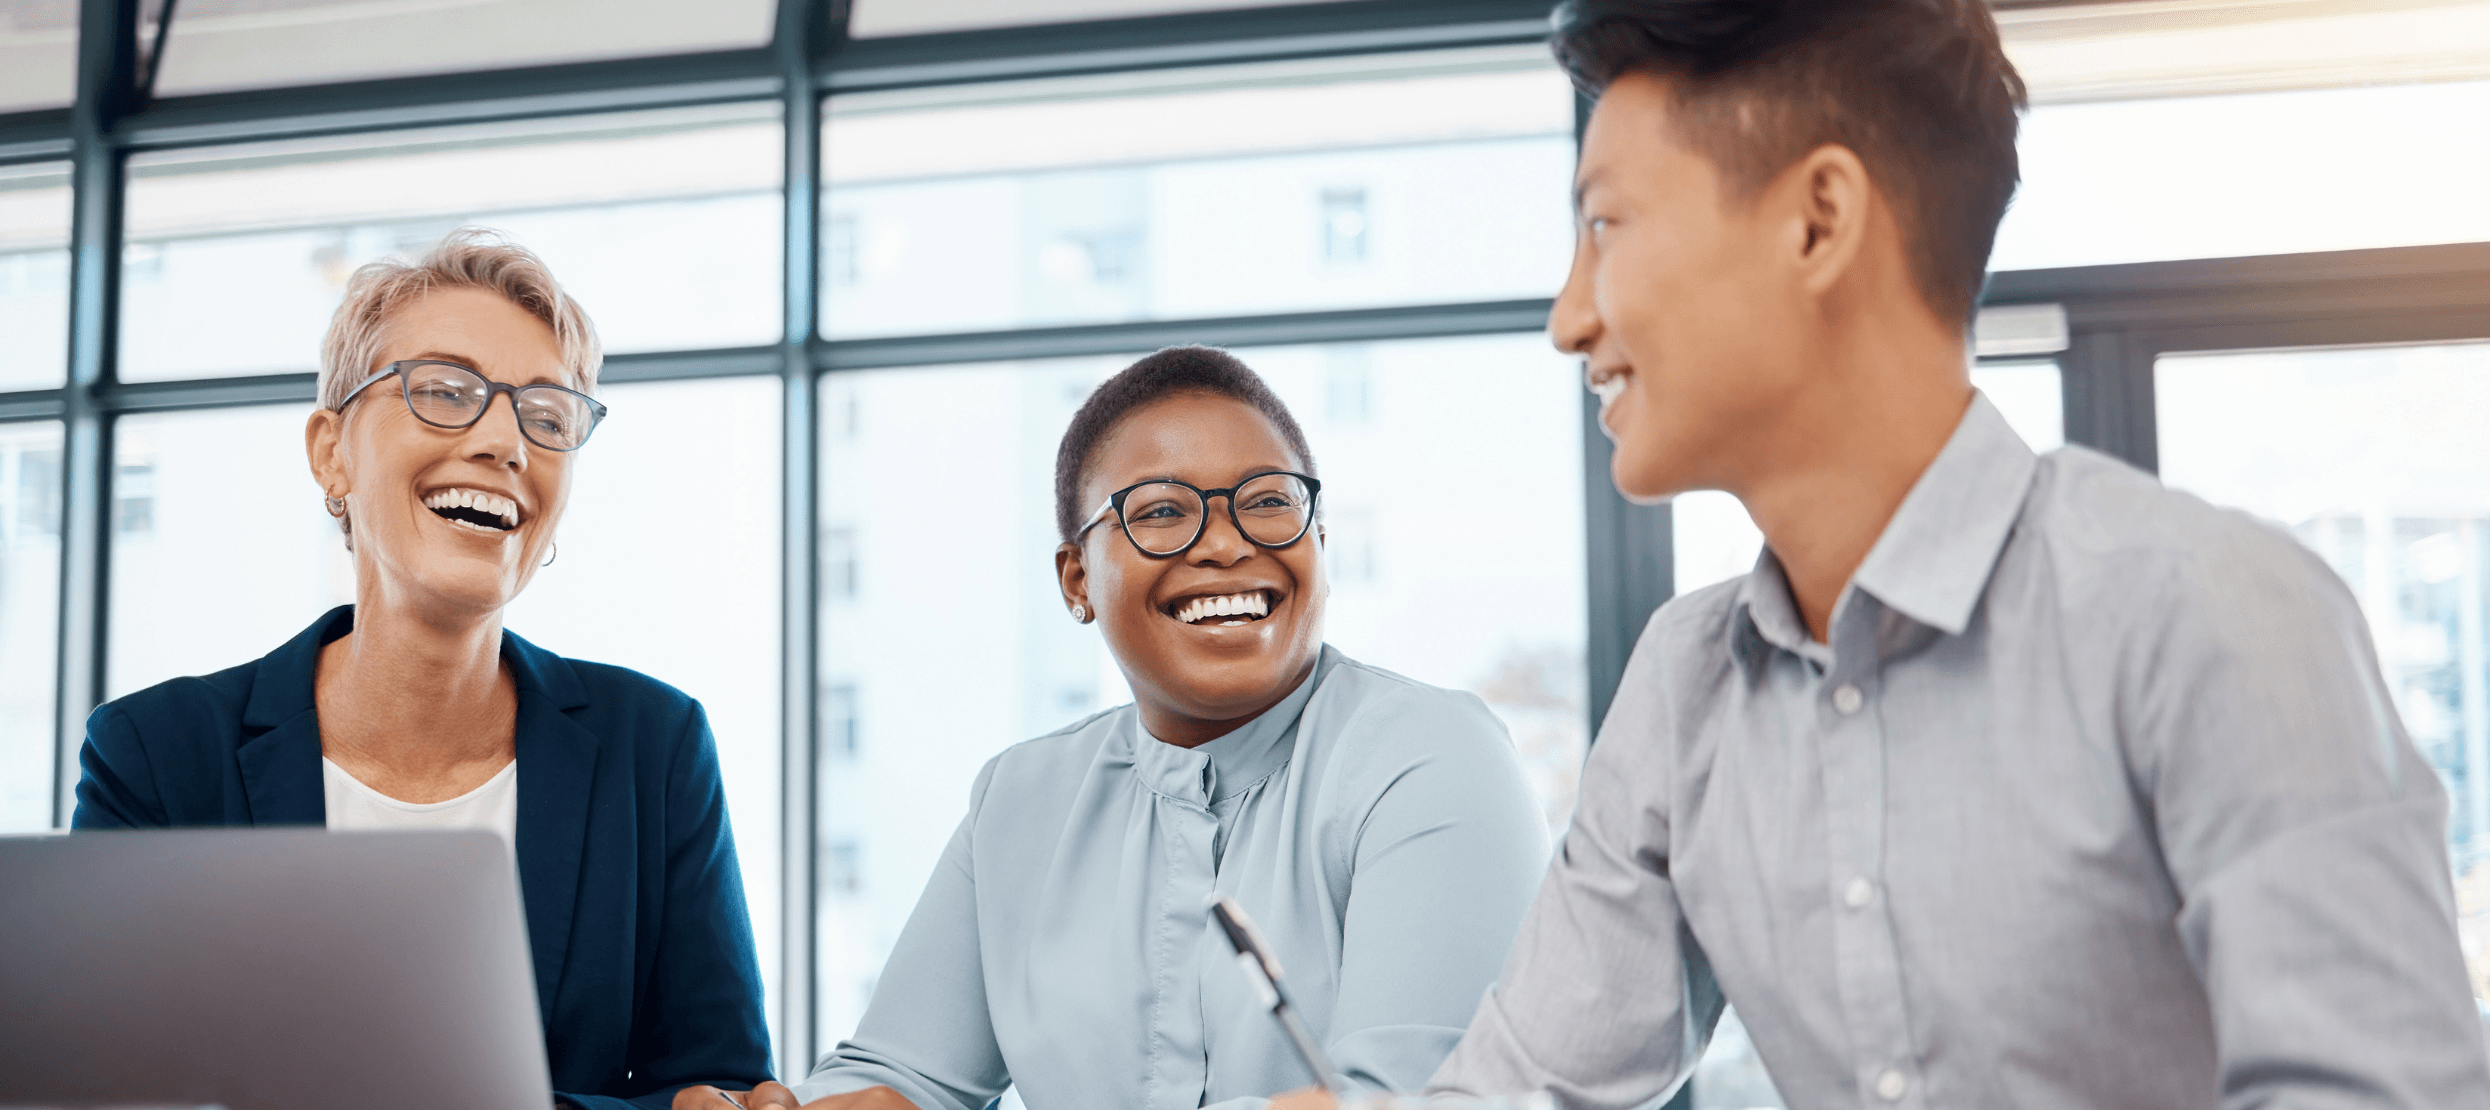 Creating Customer Connections: Building Rapport and Expressing Empathy in Service